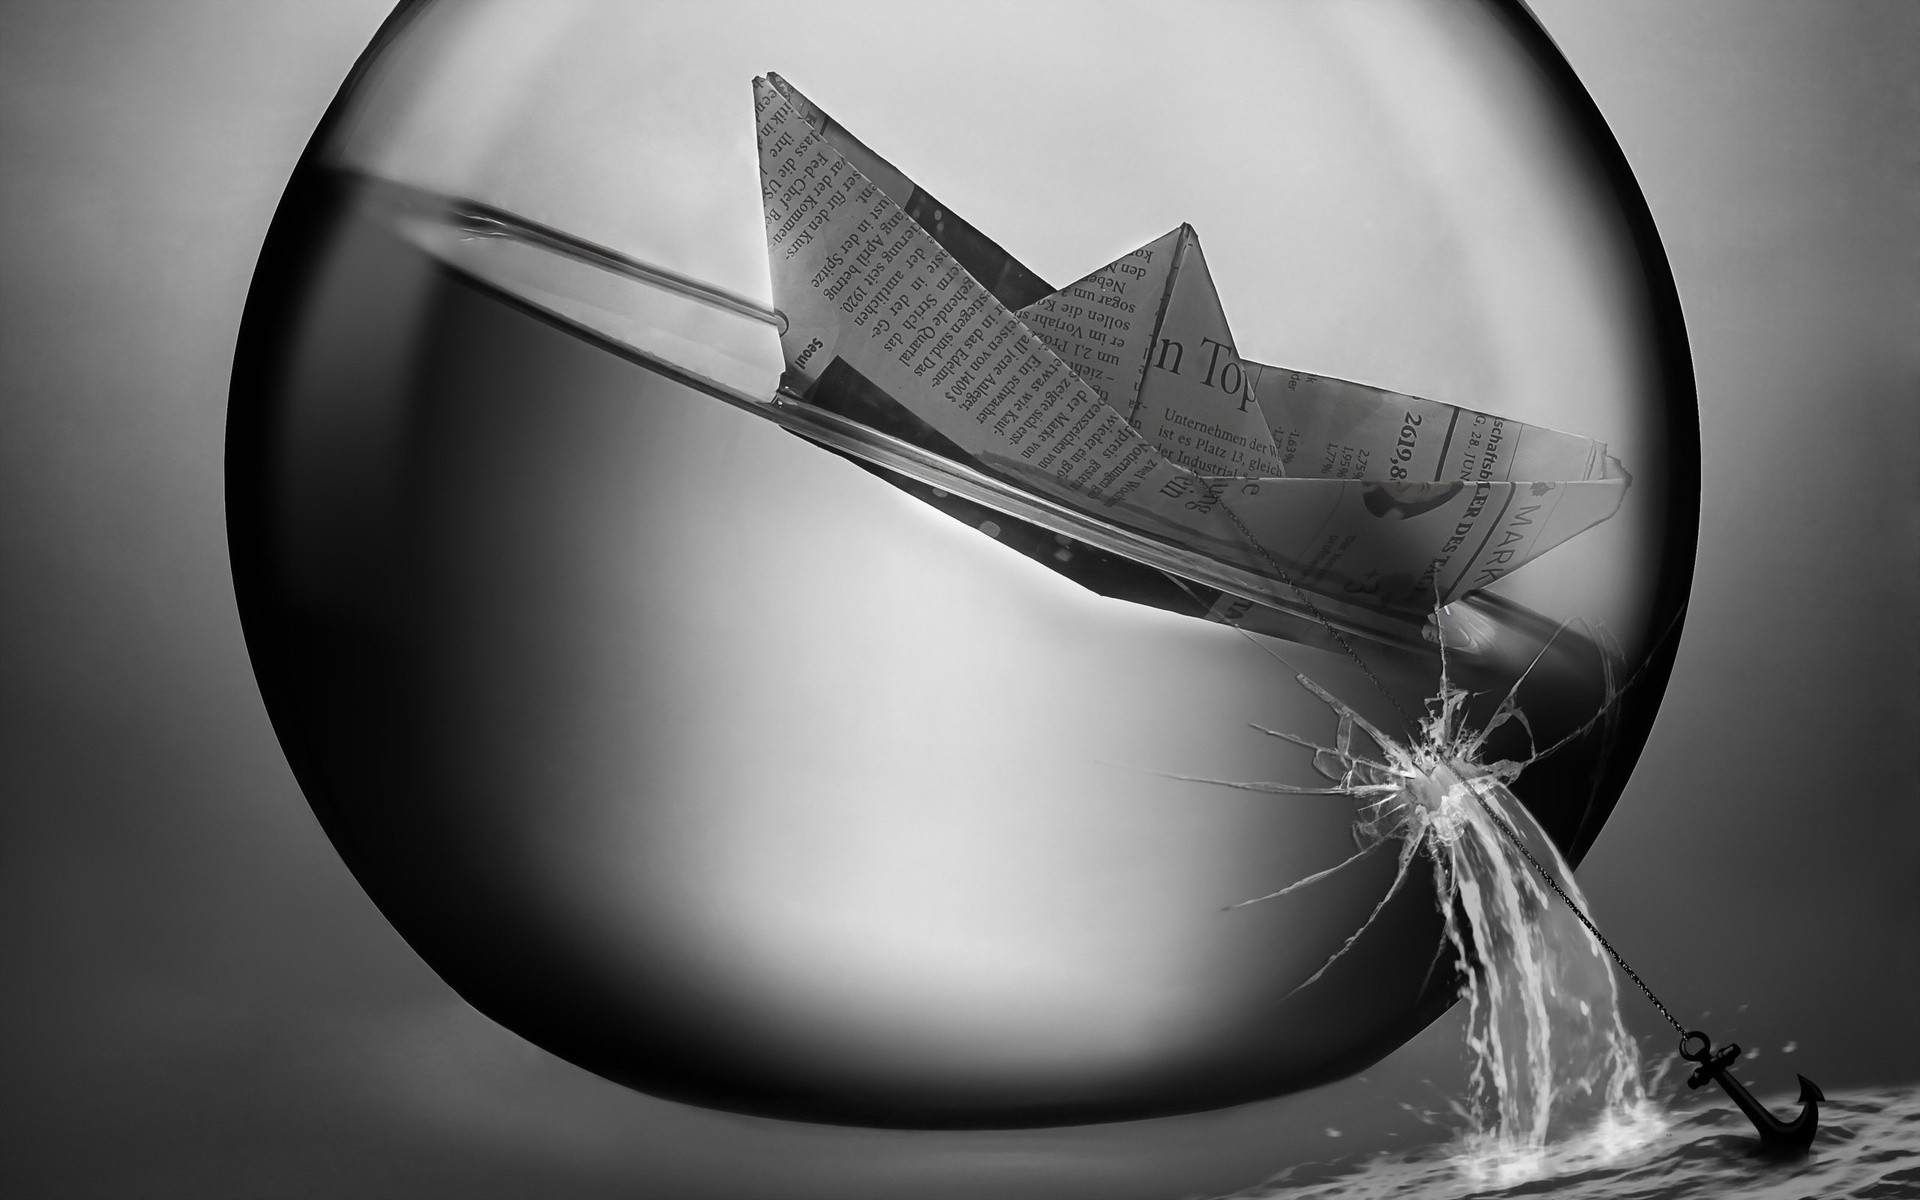 Monochrome Artwork Paper Boats Water Sphere Broken Glass Anchors Boat Paper Newspapers Chains 1920x1200